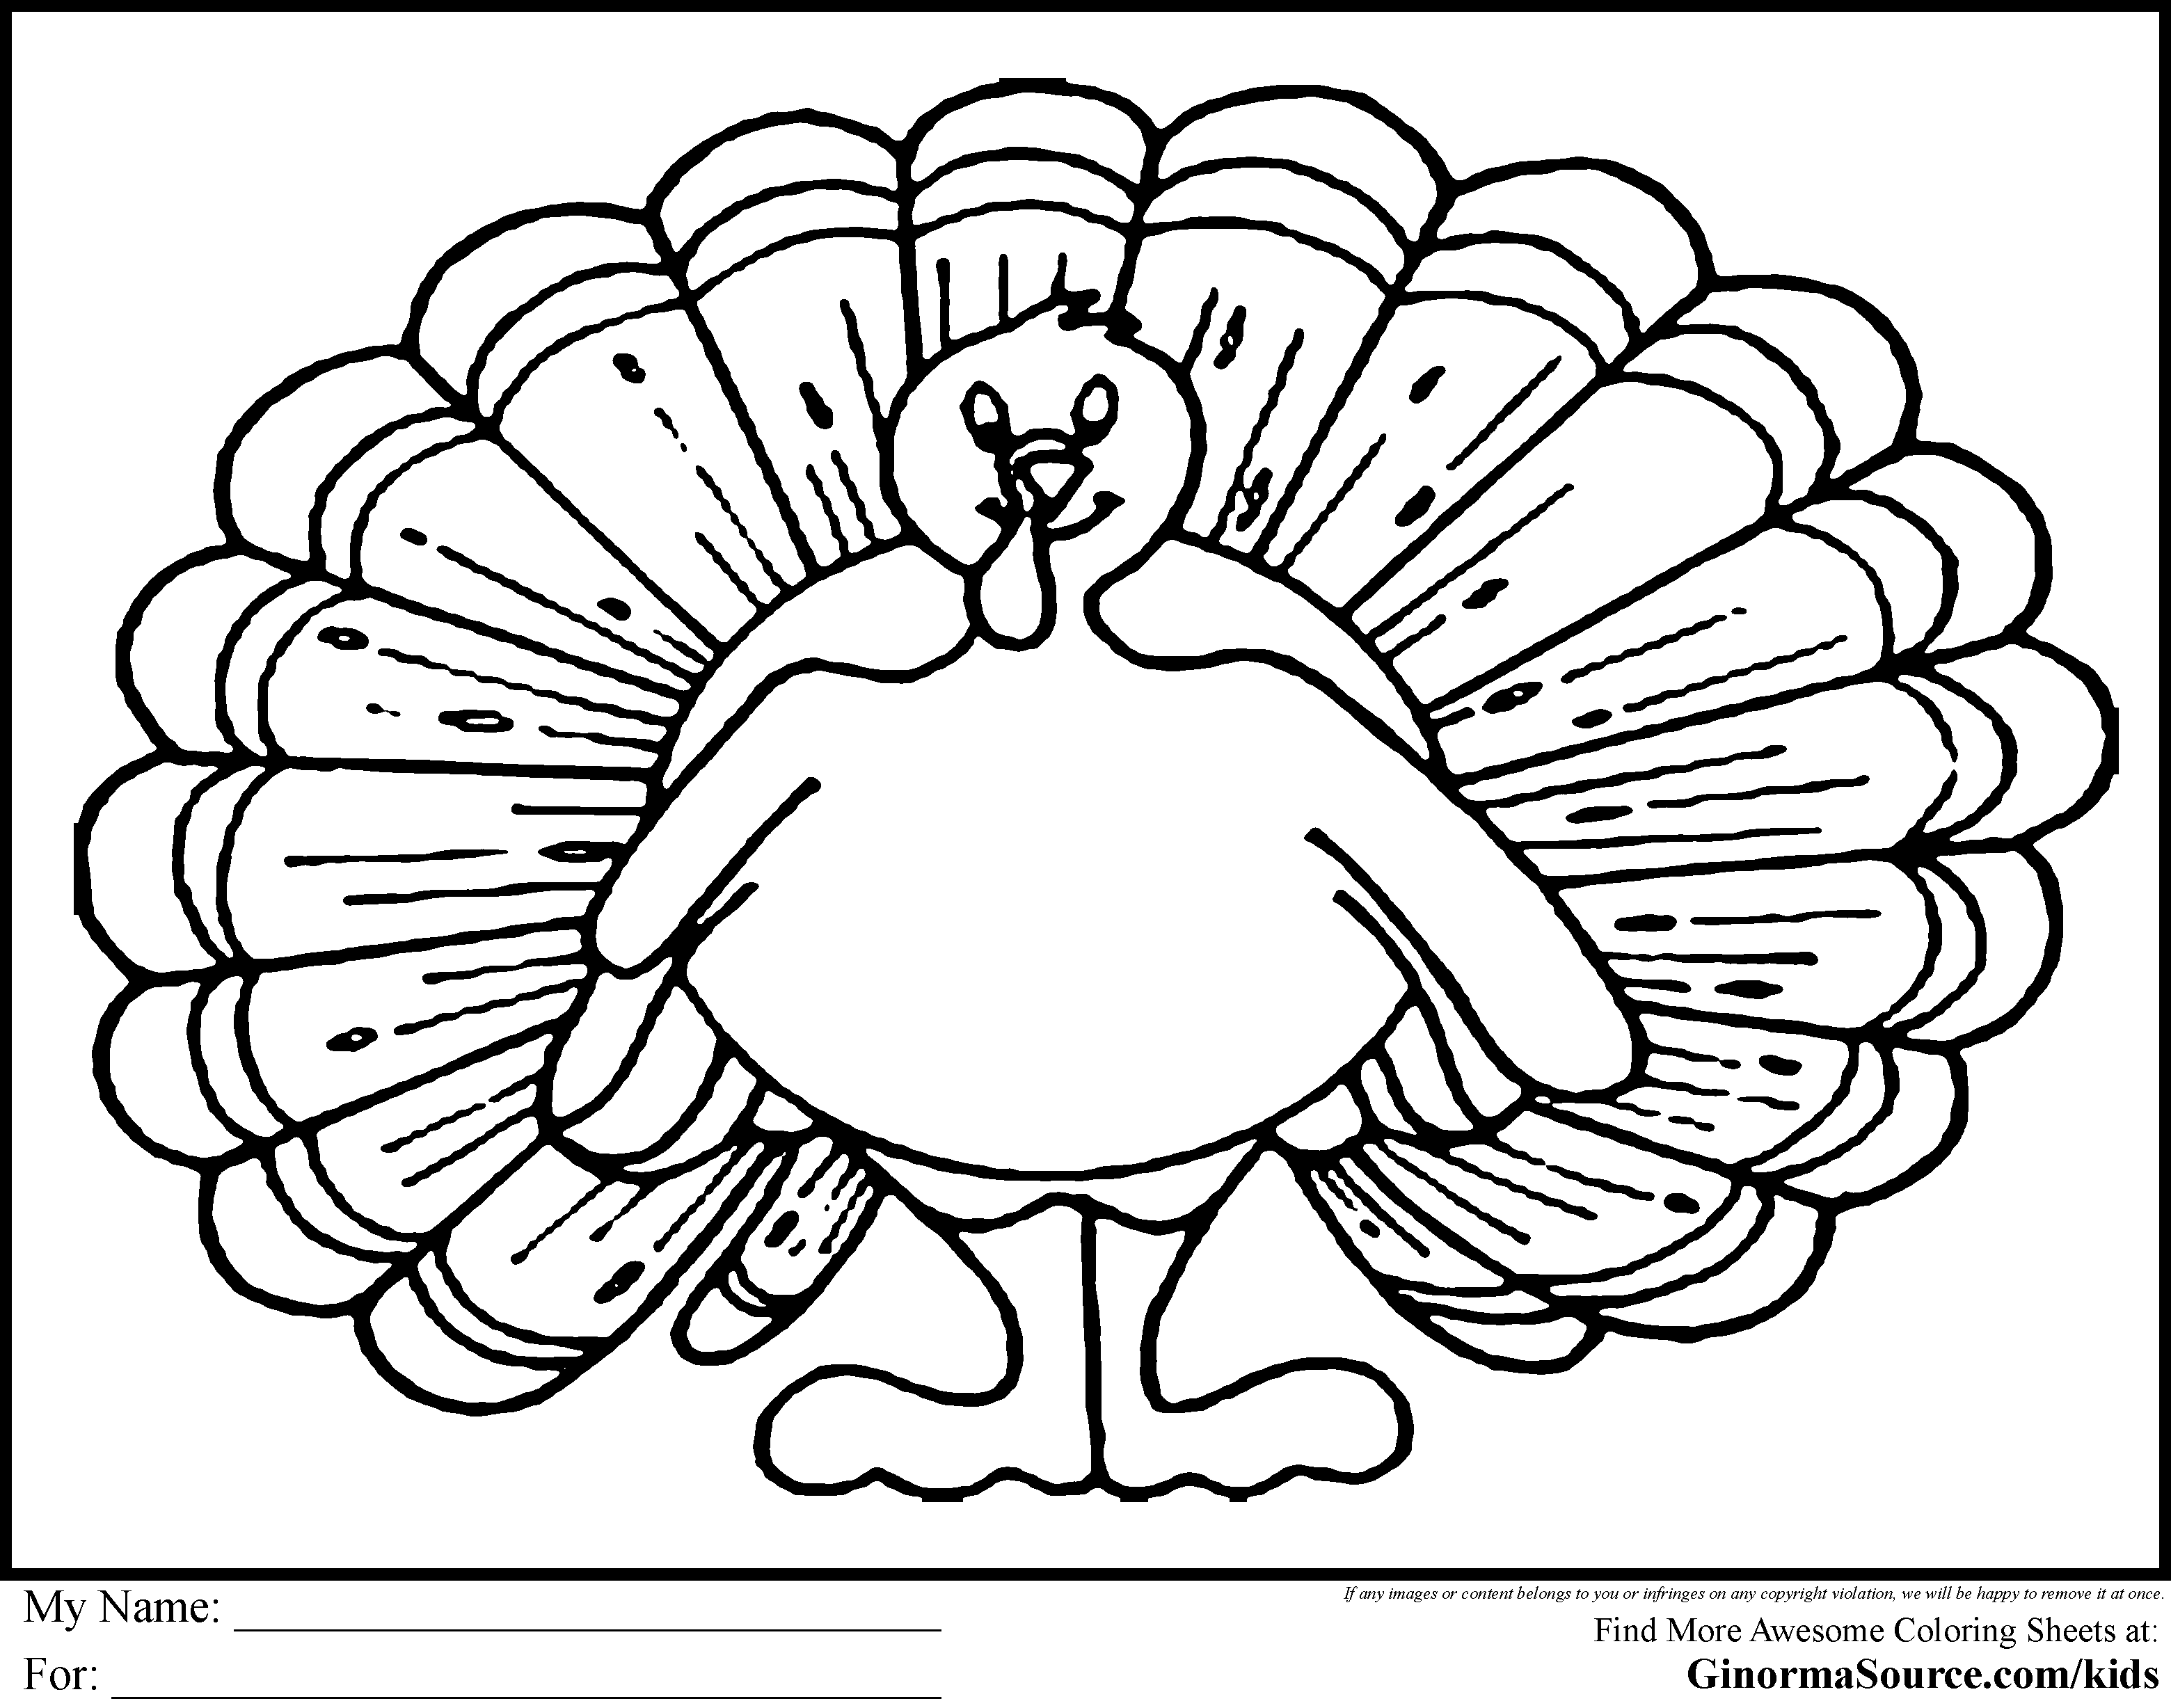 Thanksgiving Coloring Pages Dr Odd Coloring Wallpapers Download Free Images Wallpaper [coloring876.blogspot.com]